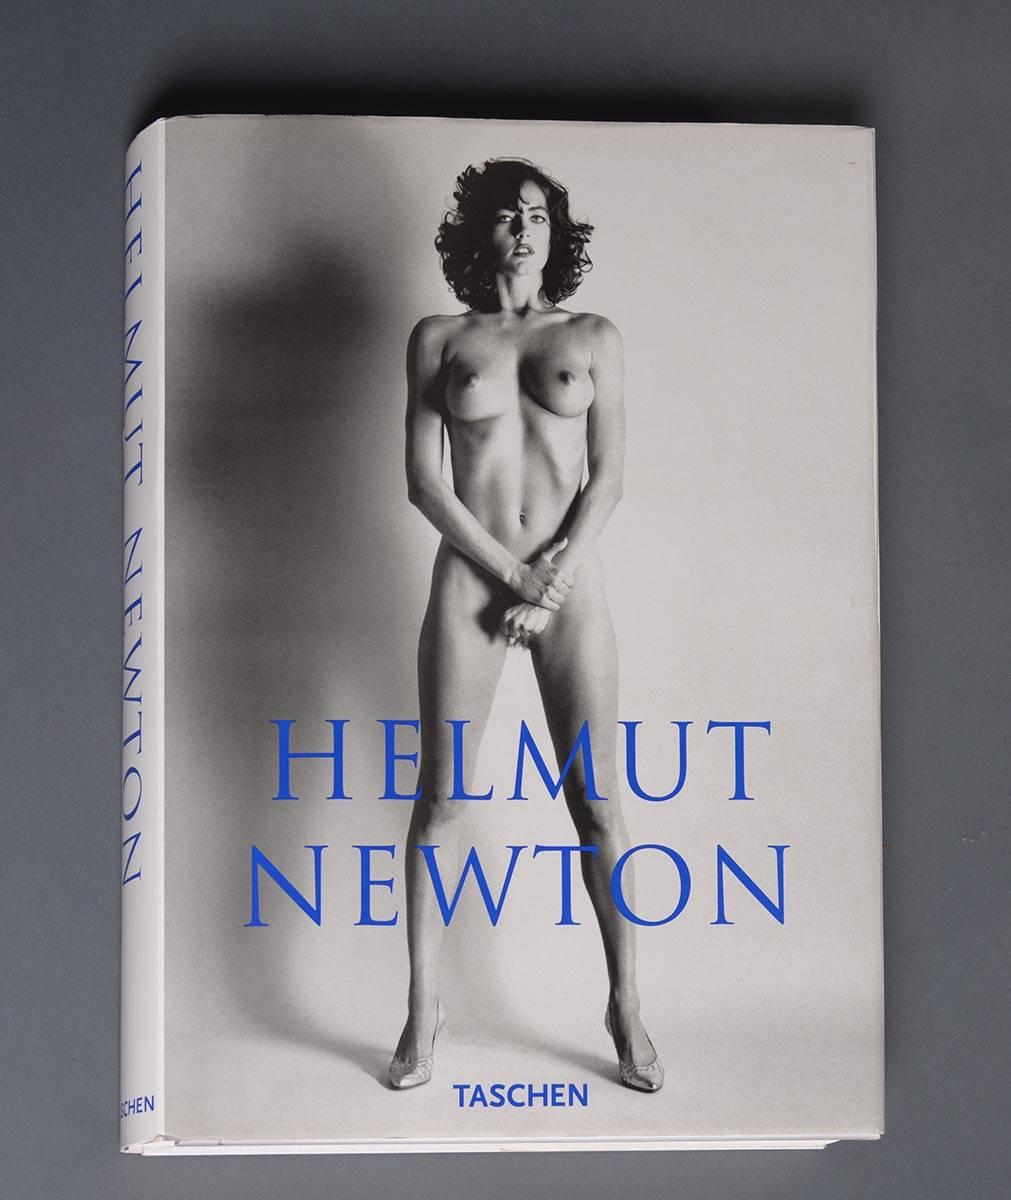 Taschen collectors`edition 06414/10000 signed by Helmut Newton with stand designed by Philippe Starck.
This is the biggest and most expensive book production in the 20th century. It is the limited edition of 10,000 copies worldwide, each signed and